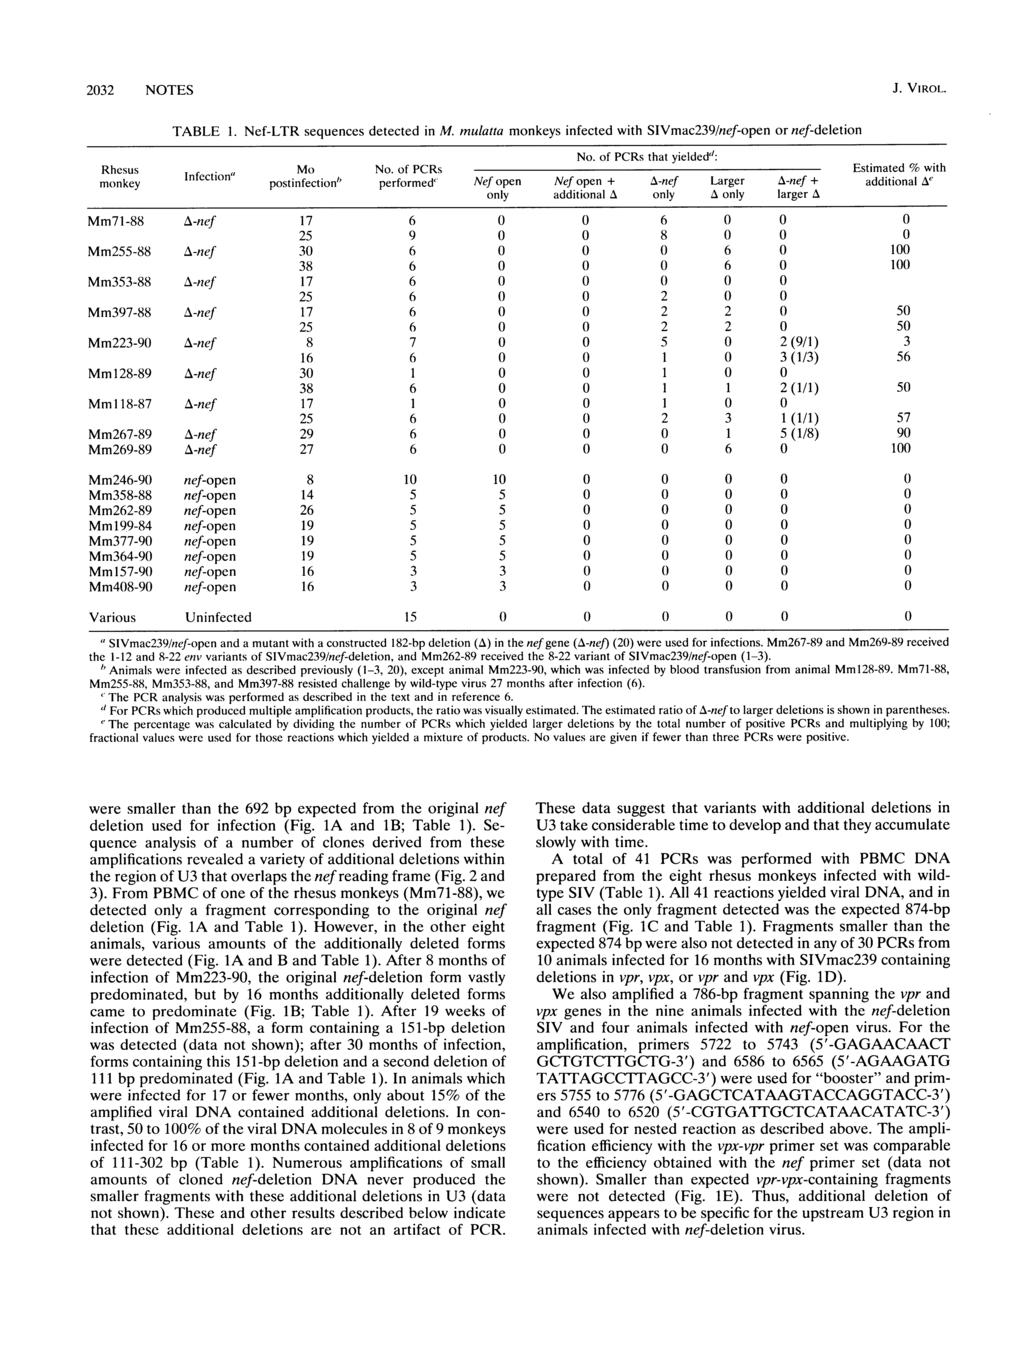 2032 NOTES J. VIROL. TABLE 1. Nef-LTR sequences detected in M. mulatta monkeys infected with SIVmac239/nef-open or nef-deletion No. of PCRs that yielded": Rhesus Mo No.